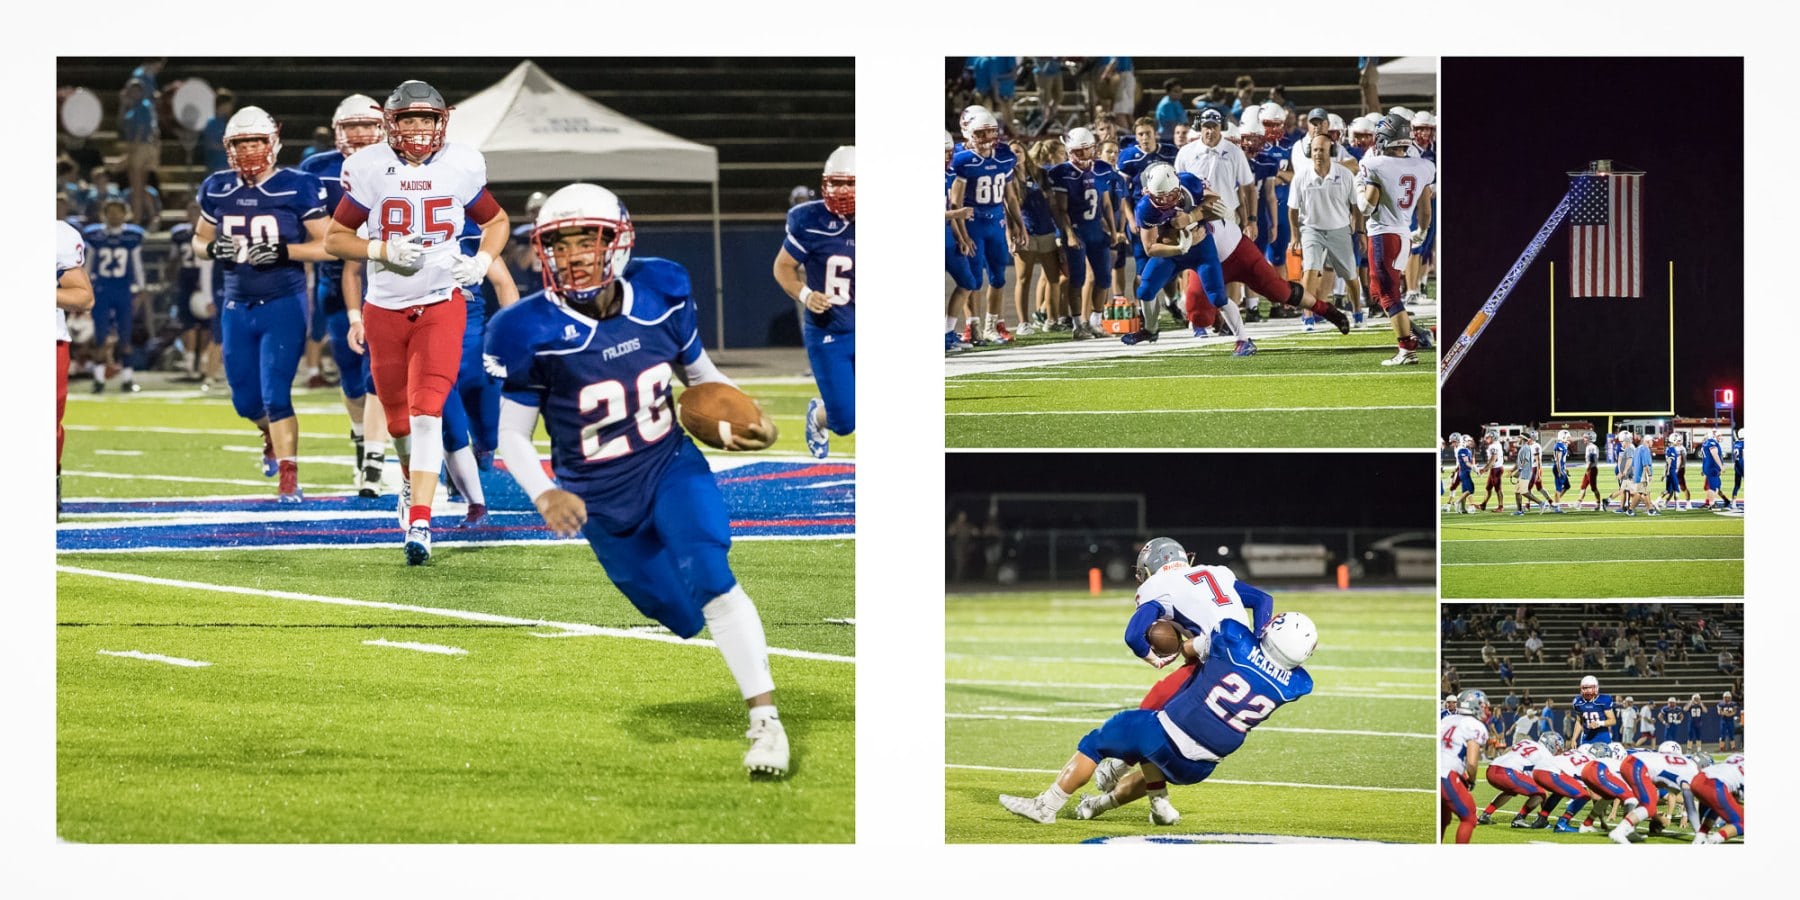 West Henderson High School Football Memory Book example by Blue Ridge Expressions.